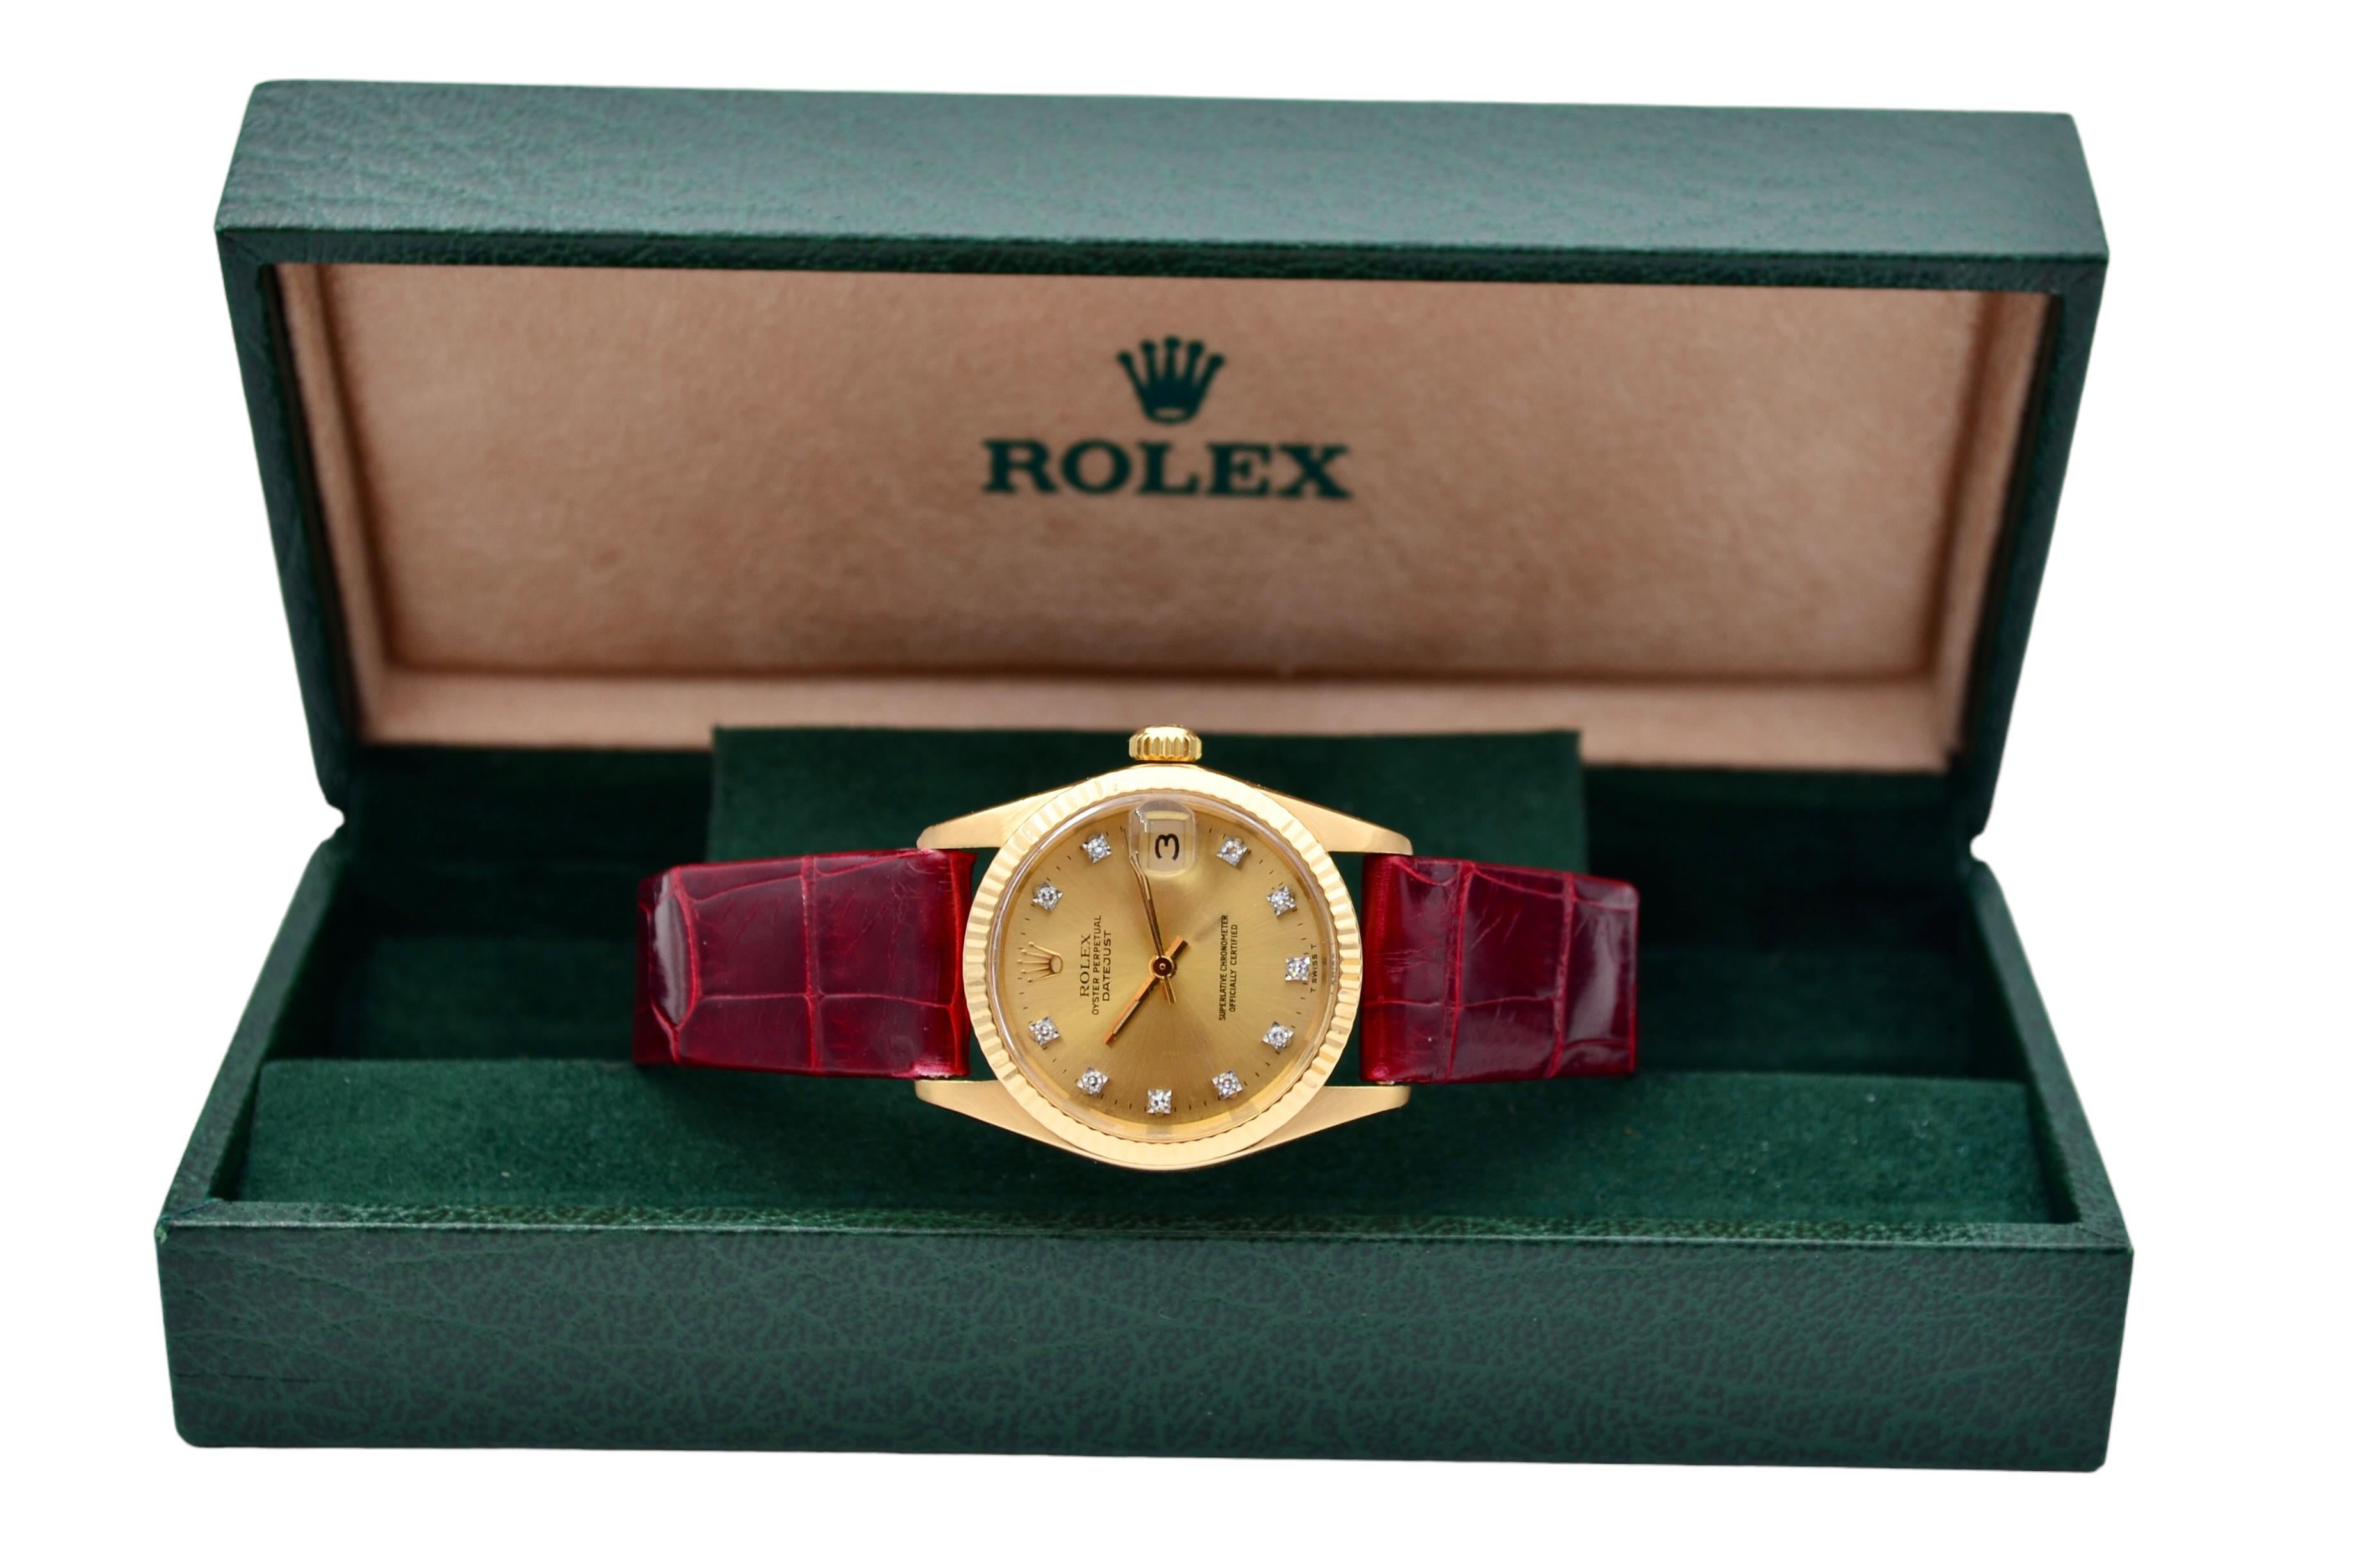 The watch is in a good condition and it’s working well. It shows slight signs of wear and scratches. The leather strap and the clasp are not original from Rolex. The watch comes with the original box, along with an AGS Jewelry warranty card. For